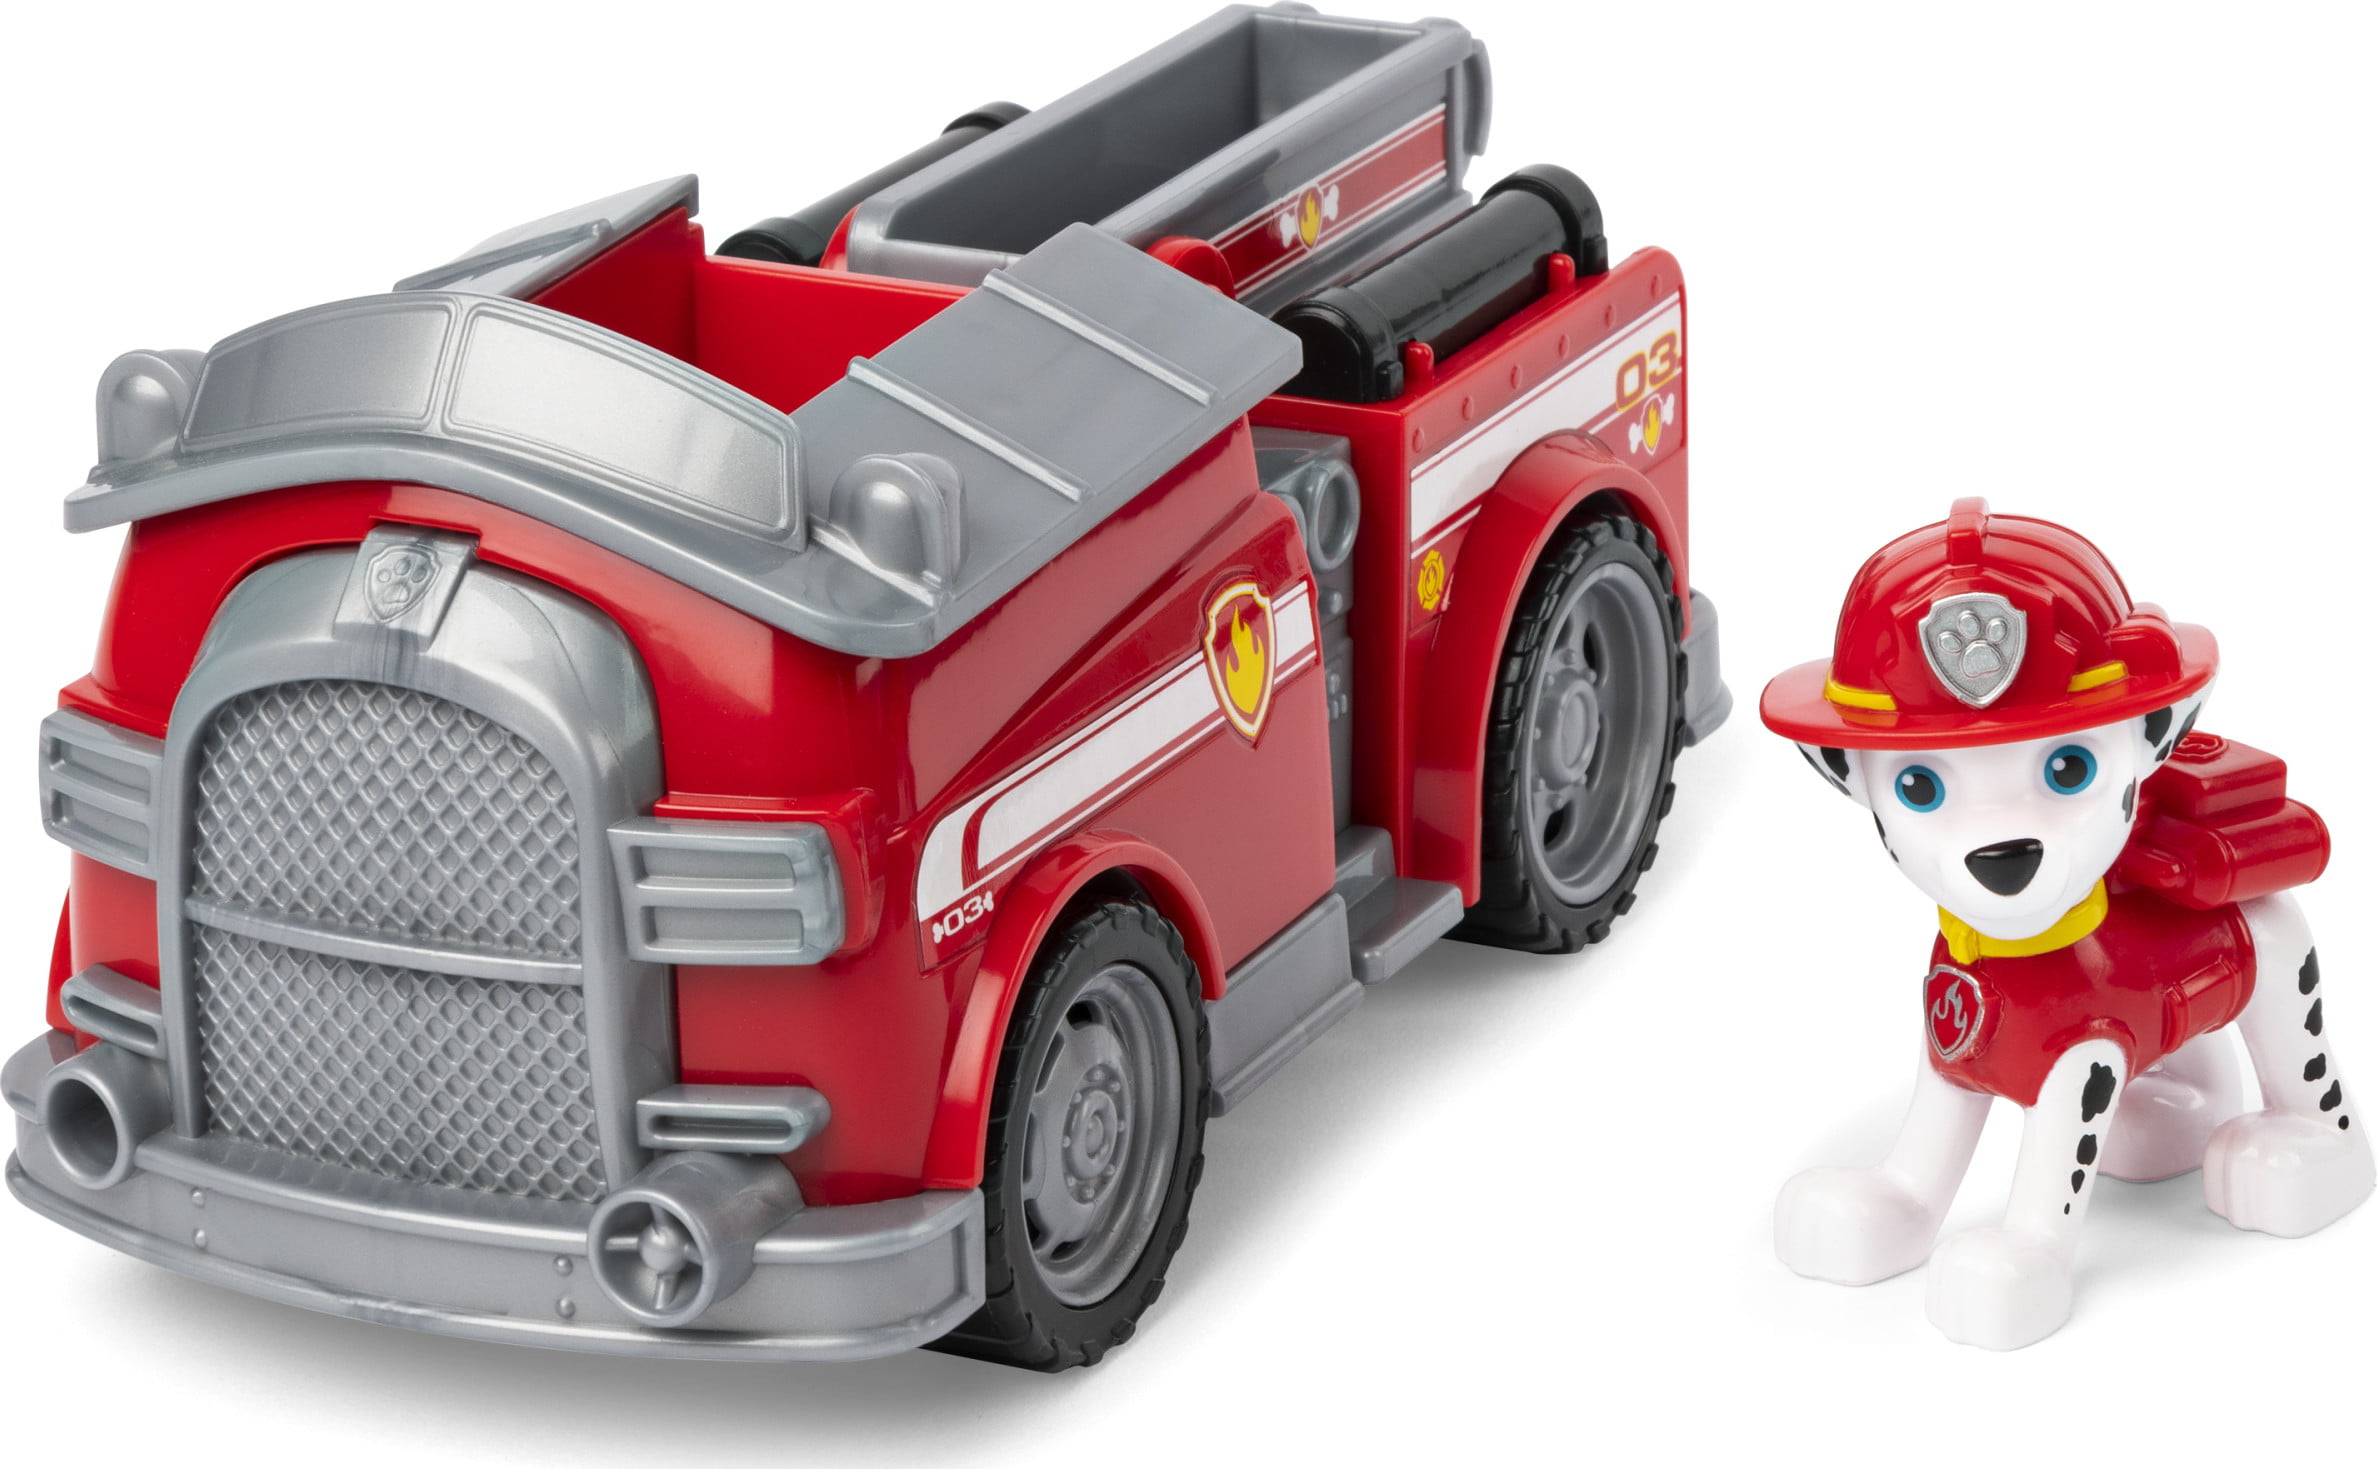 bånd scrapbog Tangle PAW Patrol, Marshall's Fire Engine Vehicle with Collectible Figure, for  Kids Aged 3 and Up - Walmart.com